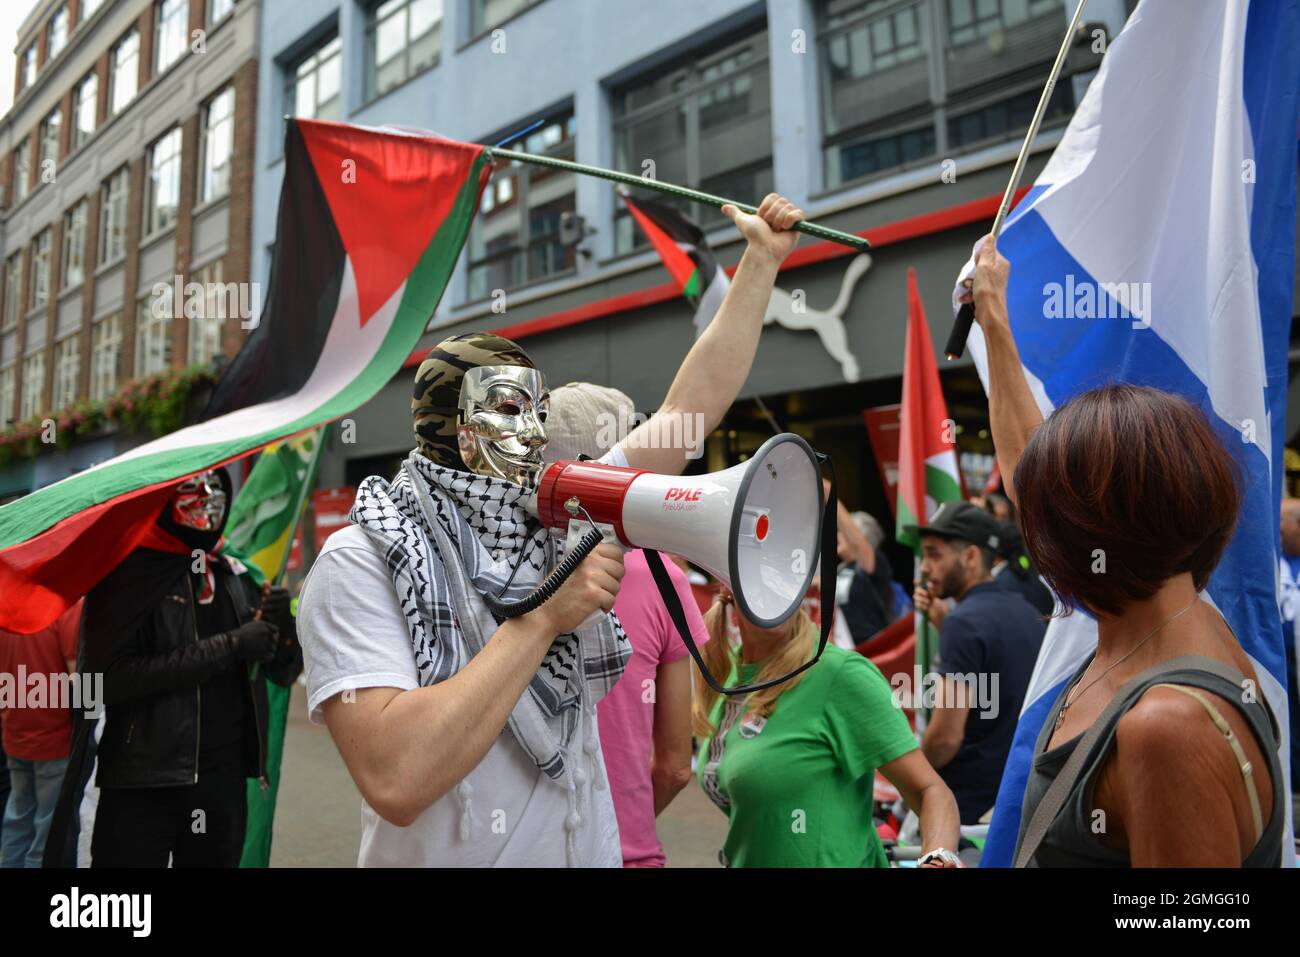 An activist with a megaphone confronts a counter protester with an Israeli flag during the demonstration. Boycott Puma protest organised by Palestine Solidarity Campaign and FOA (Friends of Al Aqsa) at Puma flagship store on Carnaby Street, London. Stock Photo